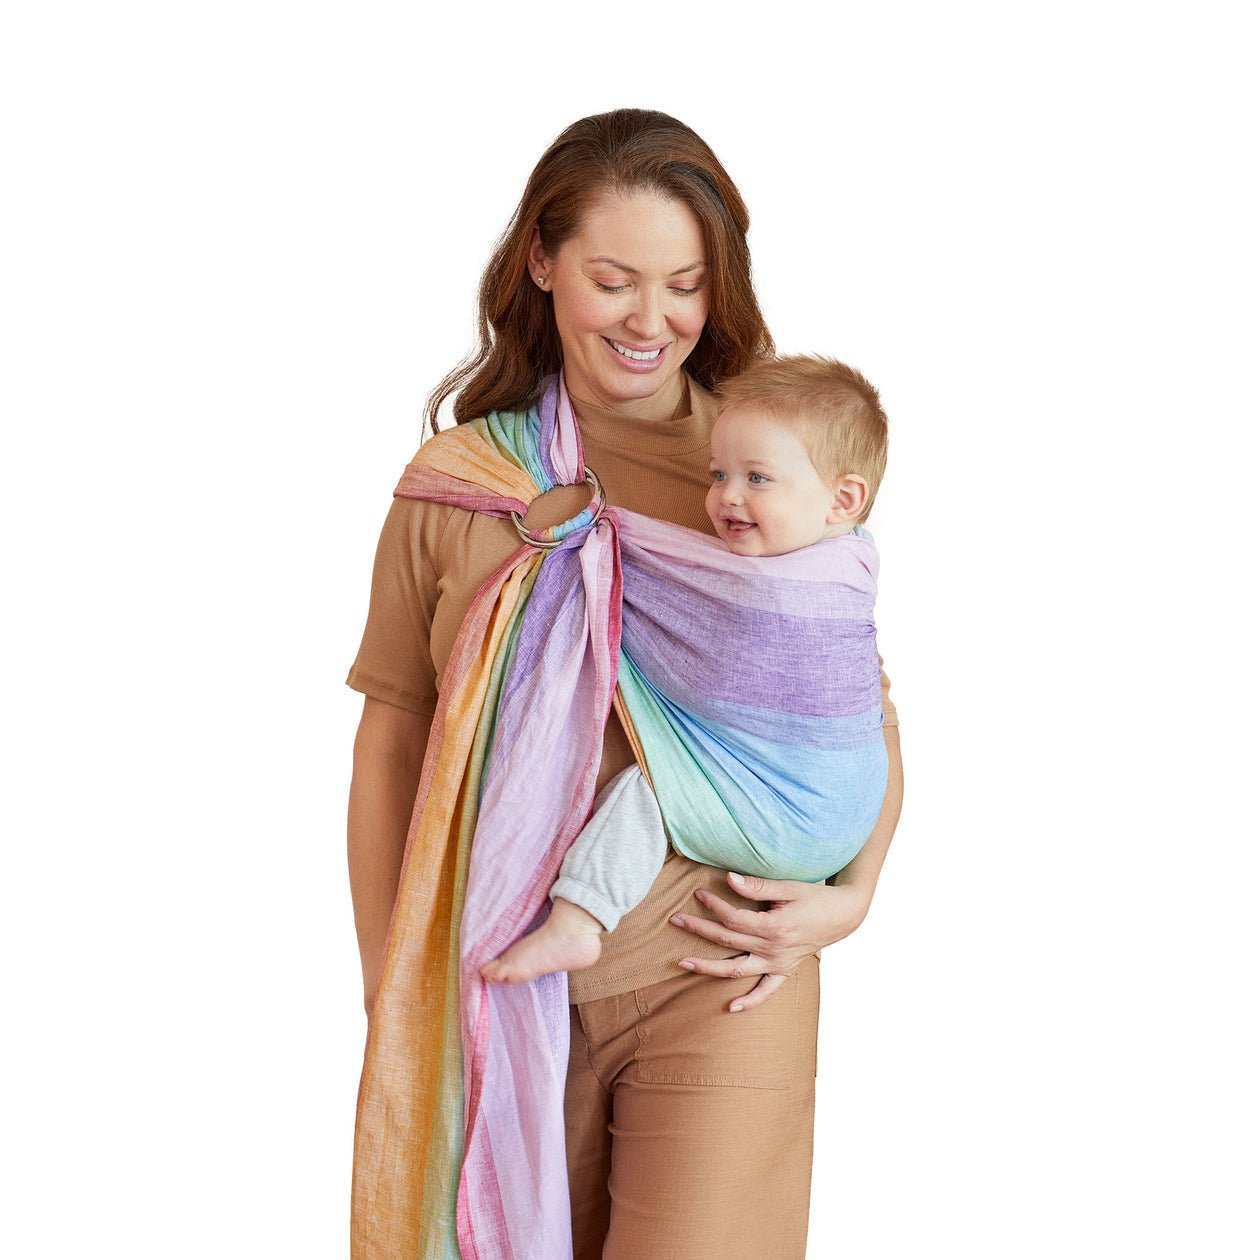 Lite-on-Shoulder Ring/Pouch Baby Sling